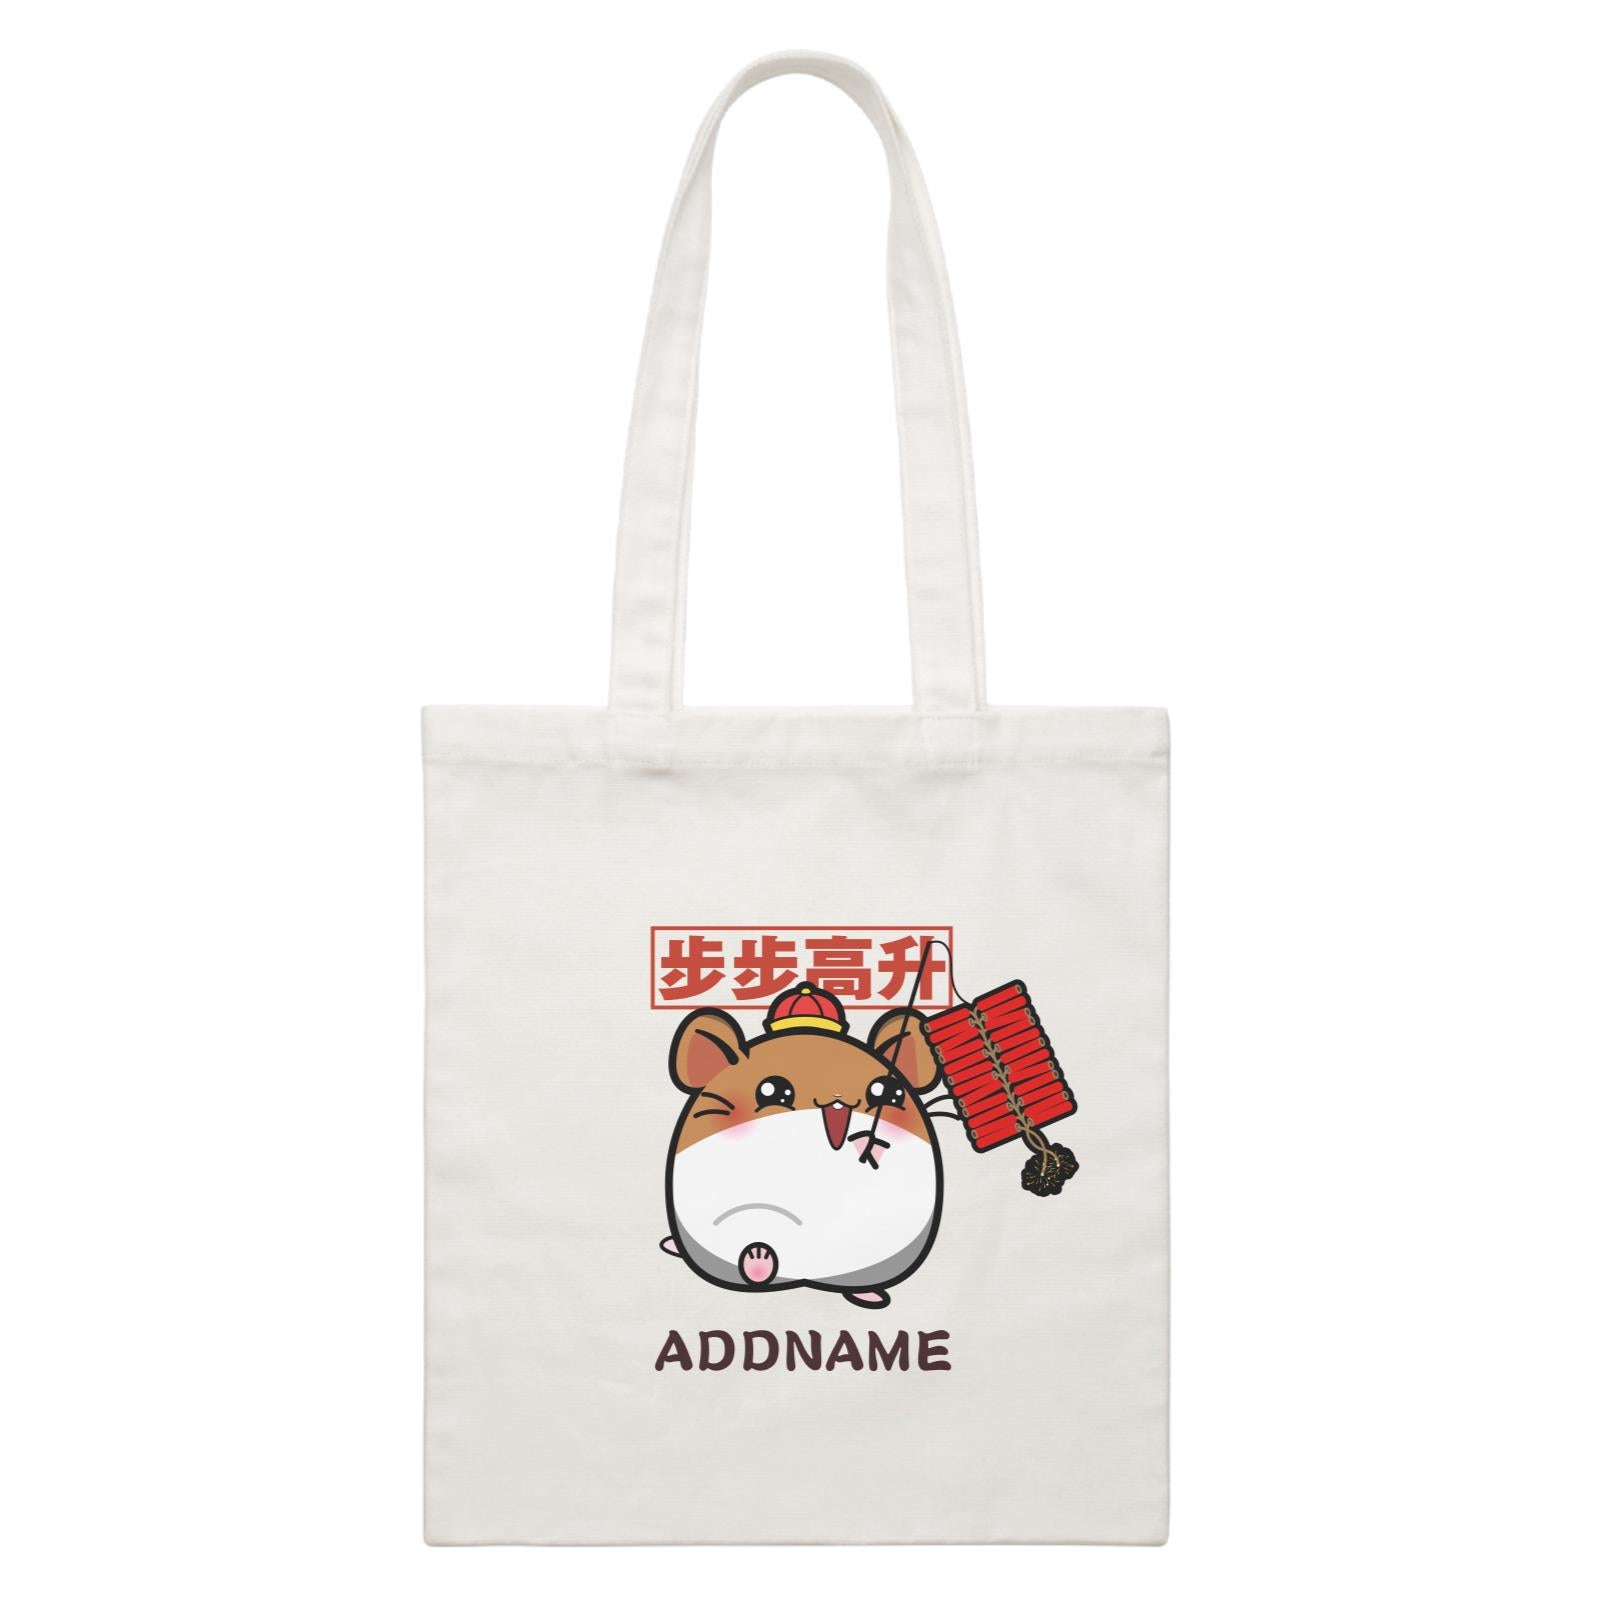 Prosperous Mouse Series Cracker Hamster Onwards And Upwards Accessories White Canvas Bag